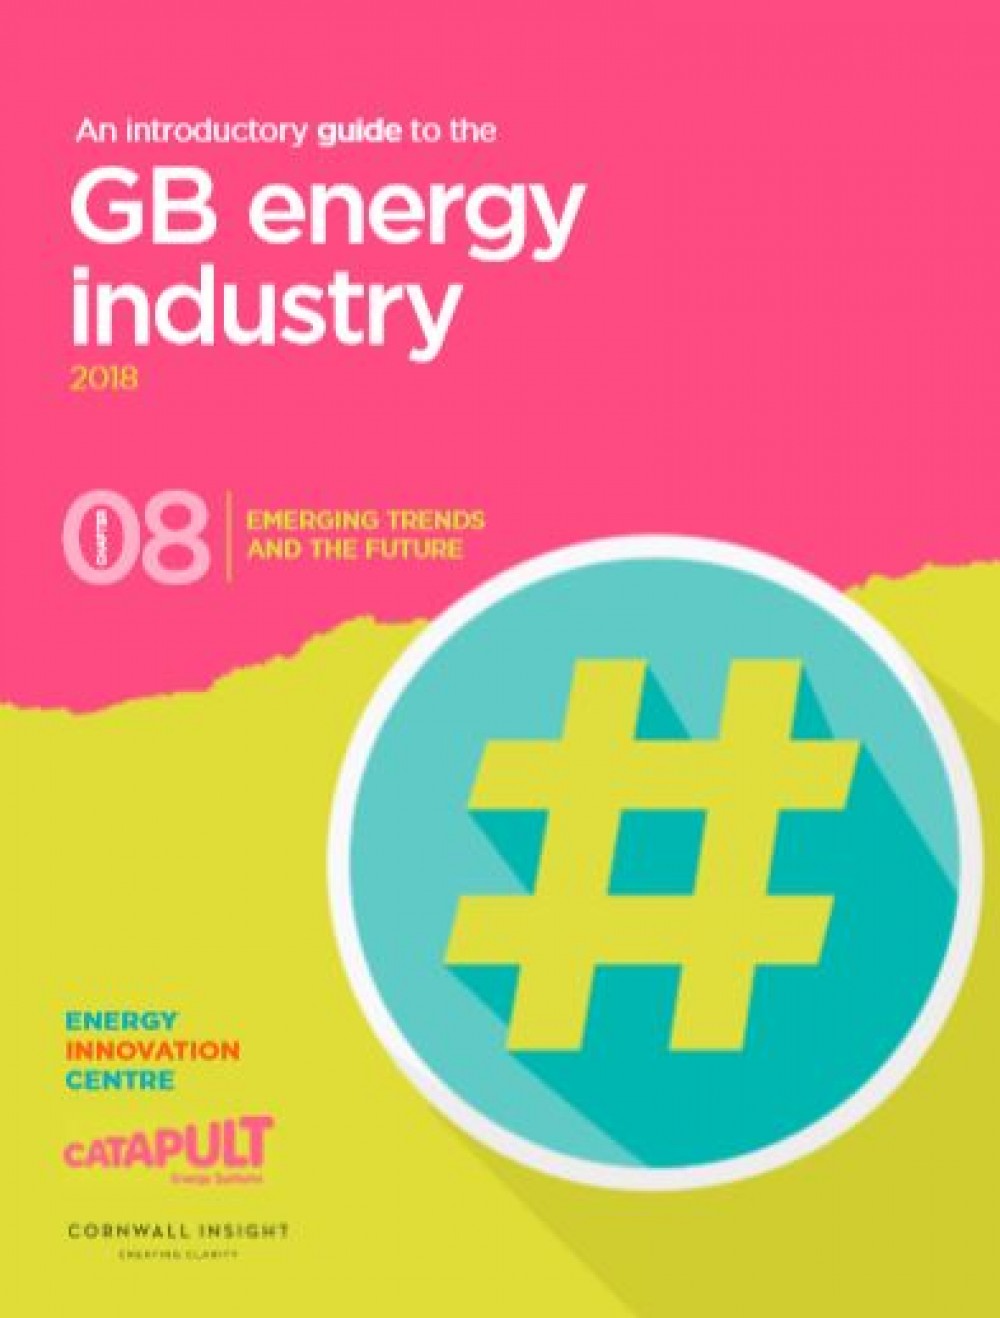 An introductory guide to the GB energy industry: Emerging trends and the future